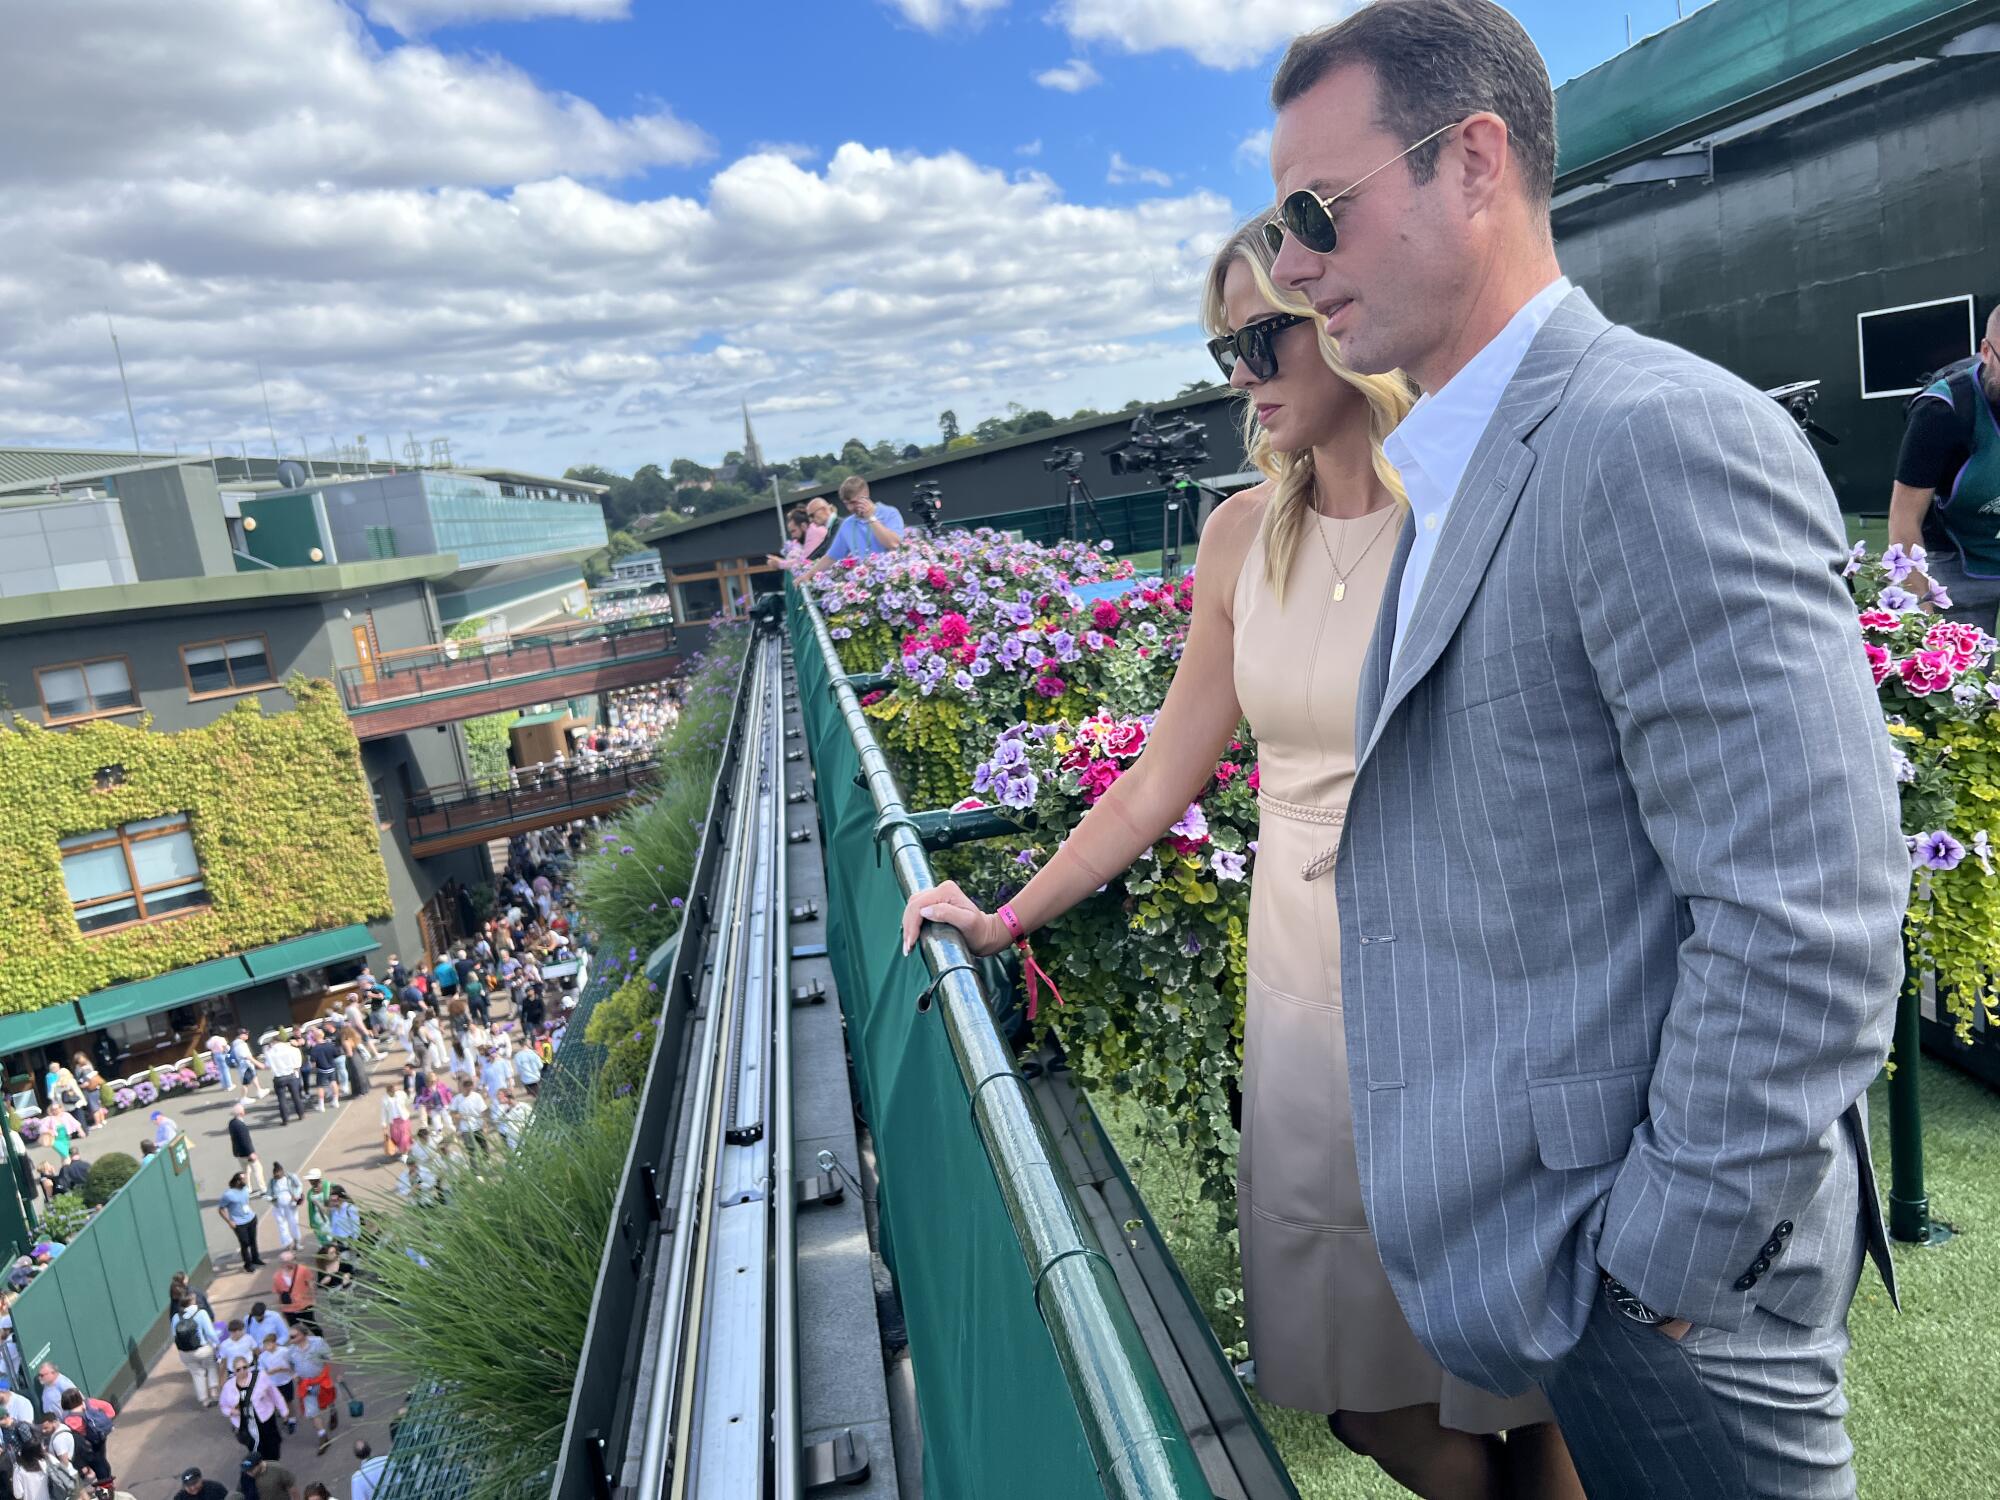 Brandon and Amy Staley look over a railing at Wimbledon.